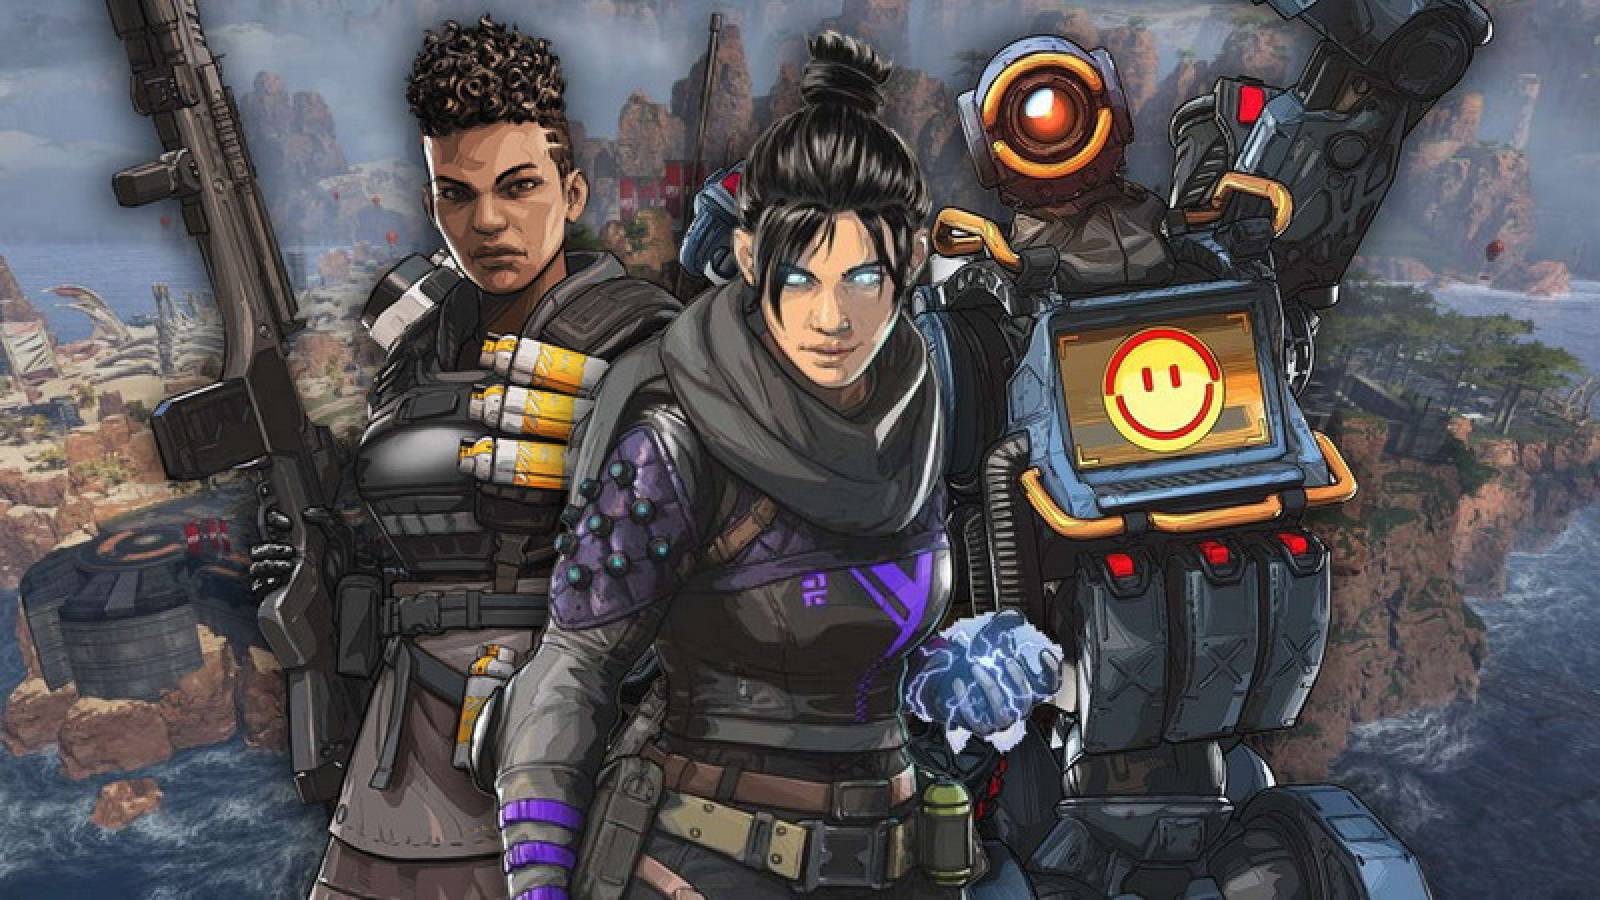 Respawn talks about game balancing and future plans for Apex Legends